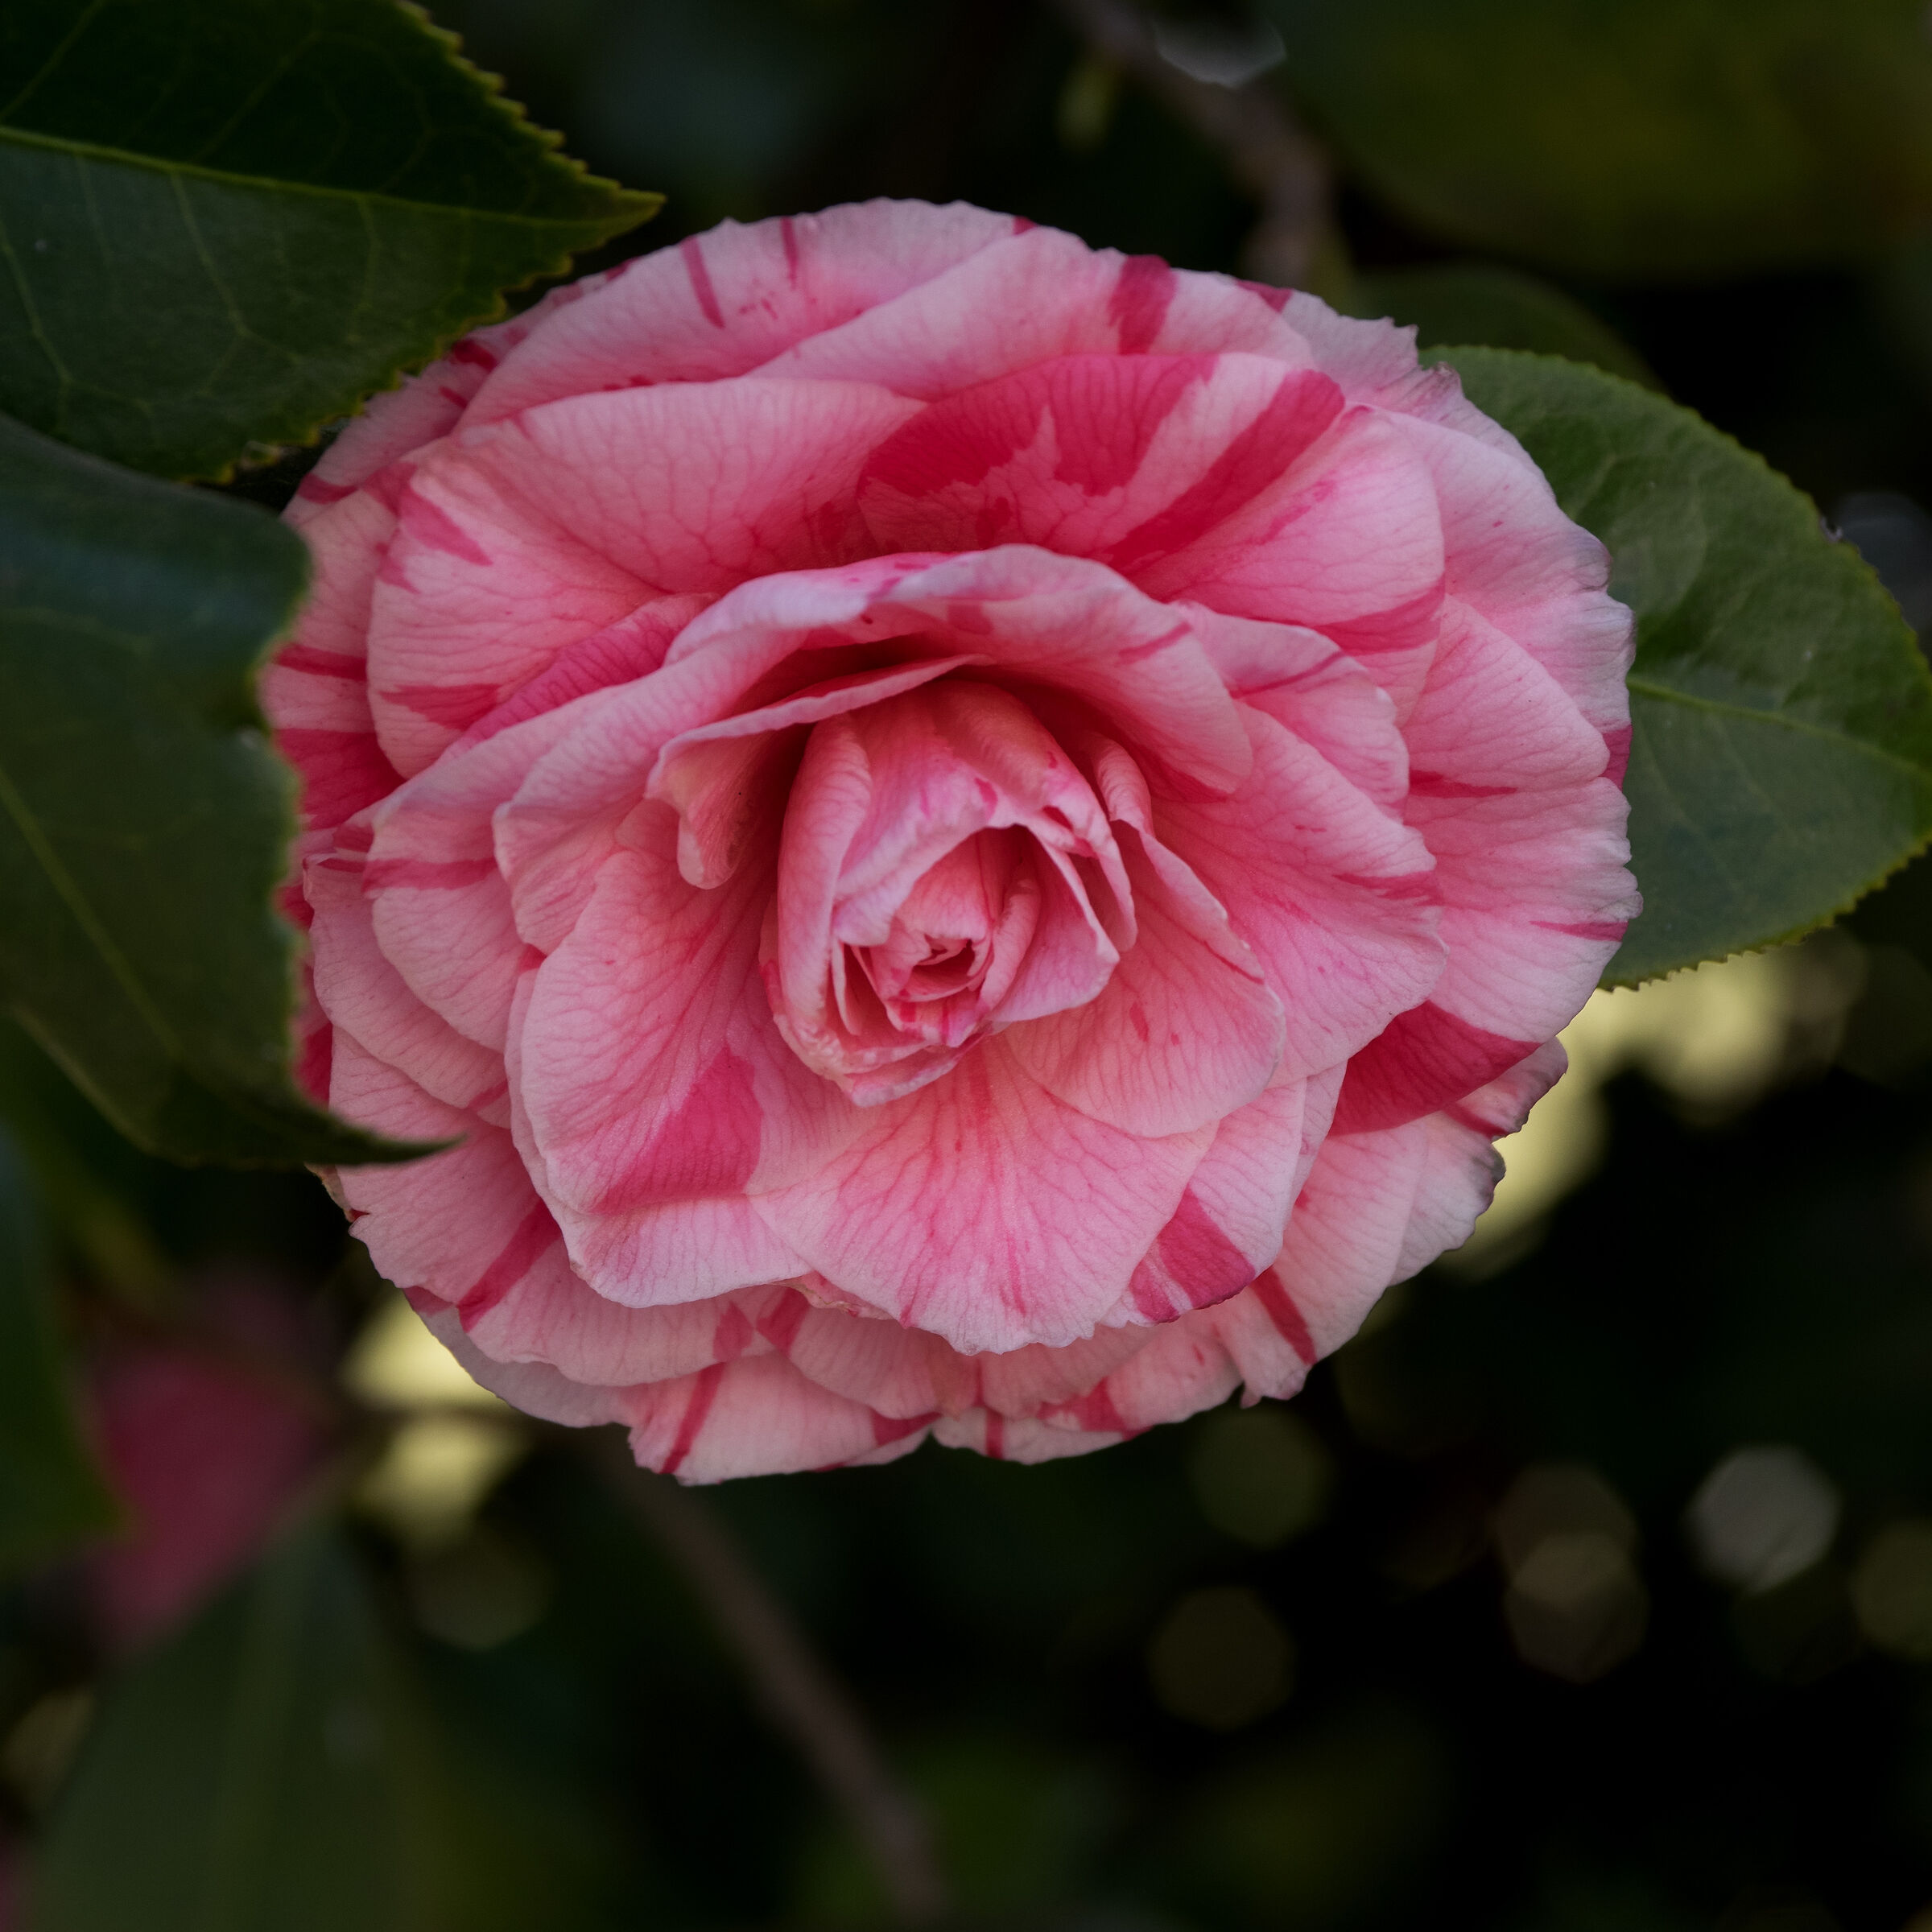 The Lady of the Camellias...